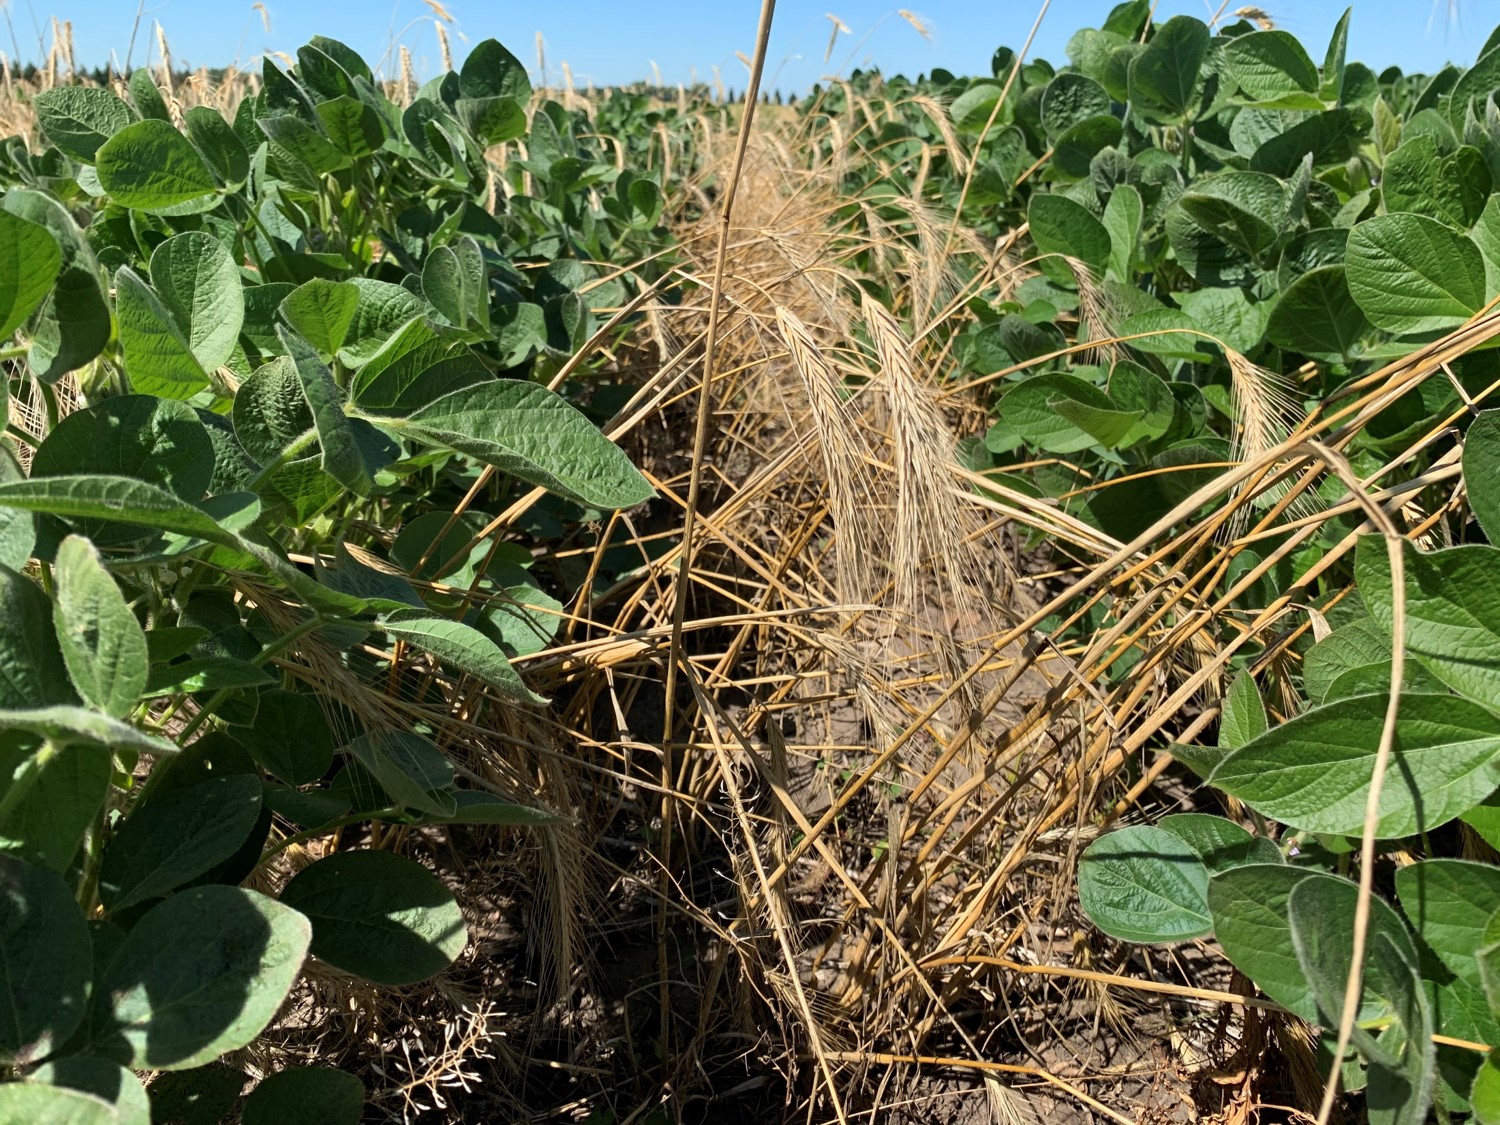 Cover crops for soybeans and dry beans will be among the topics during a row crop tour at NDSU's Carrington Research Extension Center. (NDSU photo)